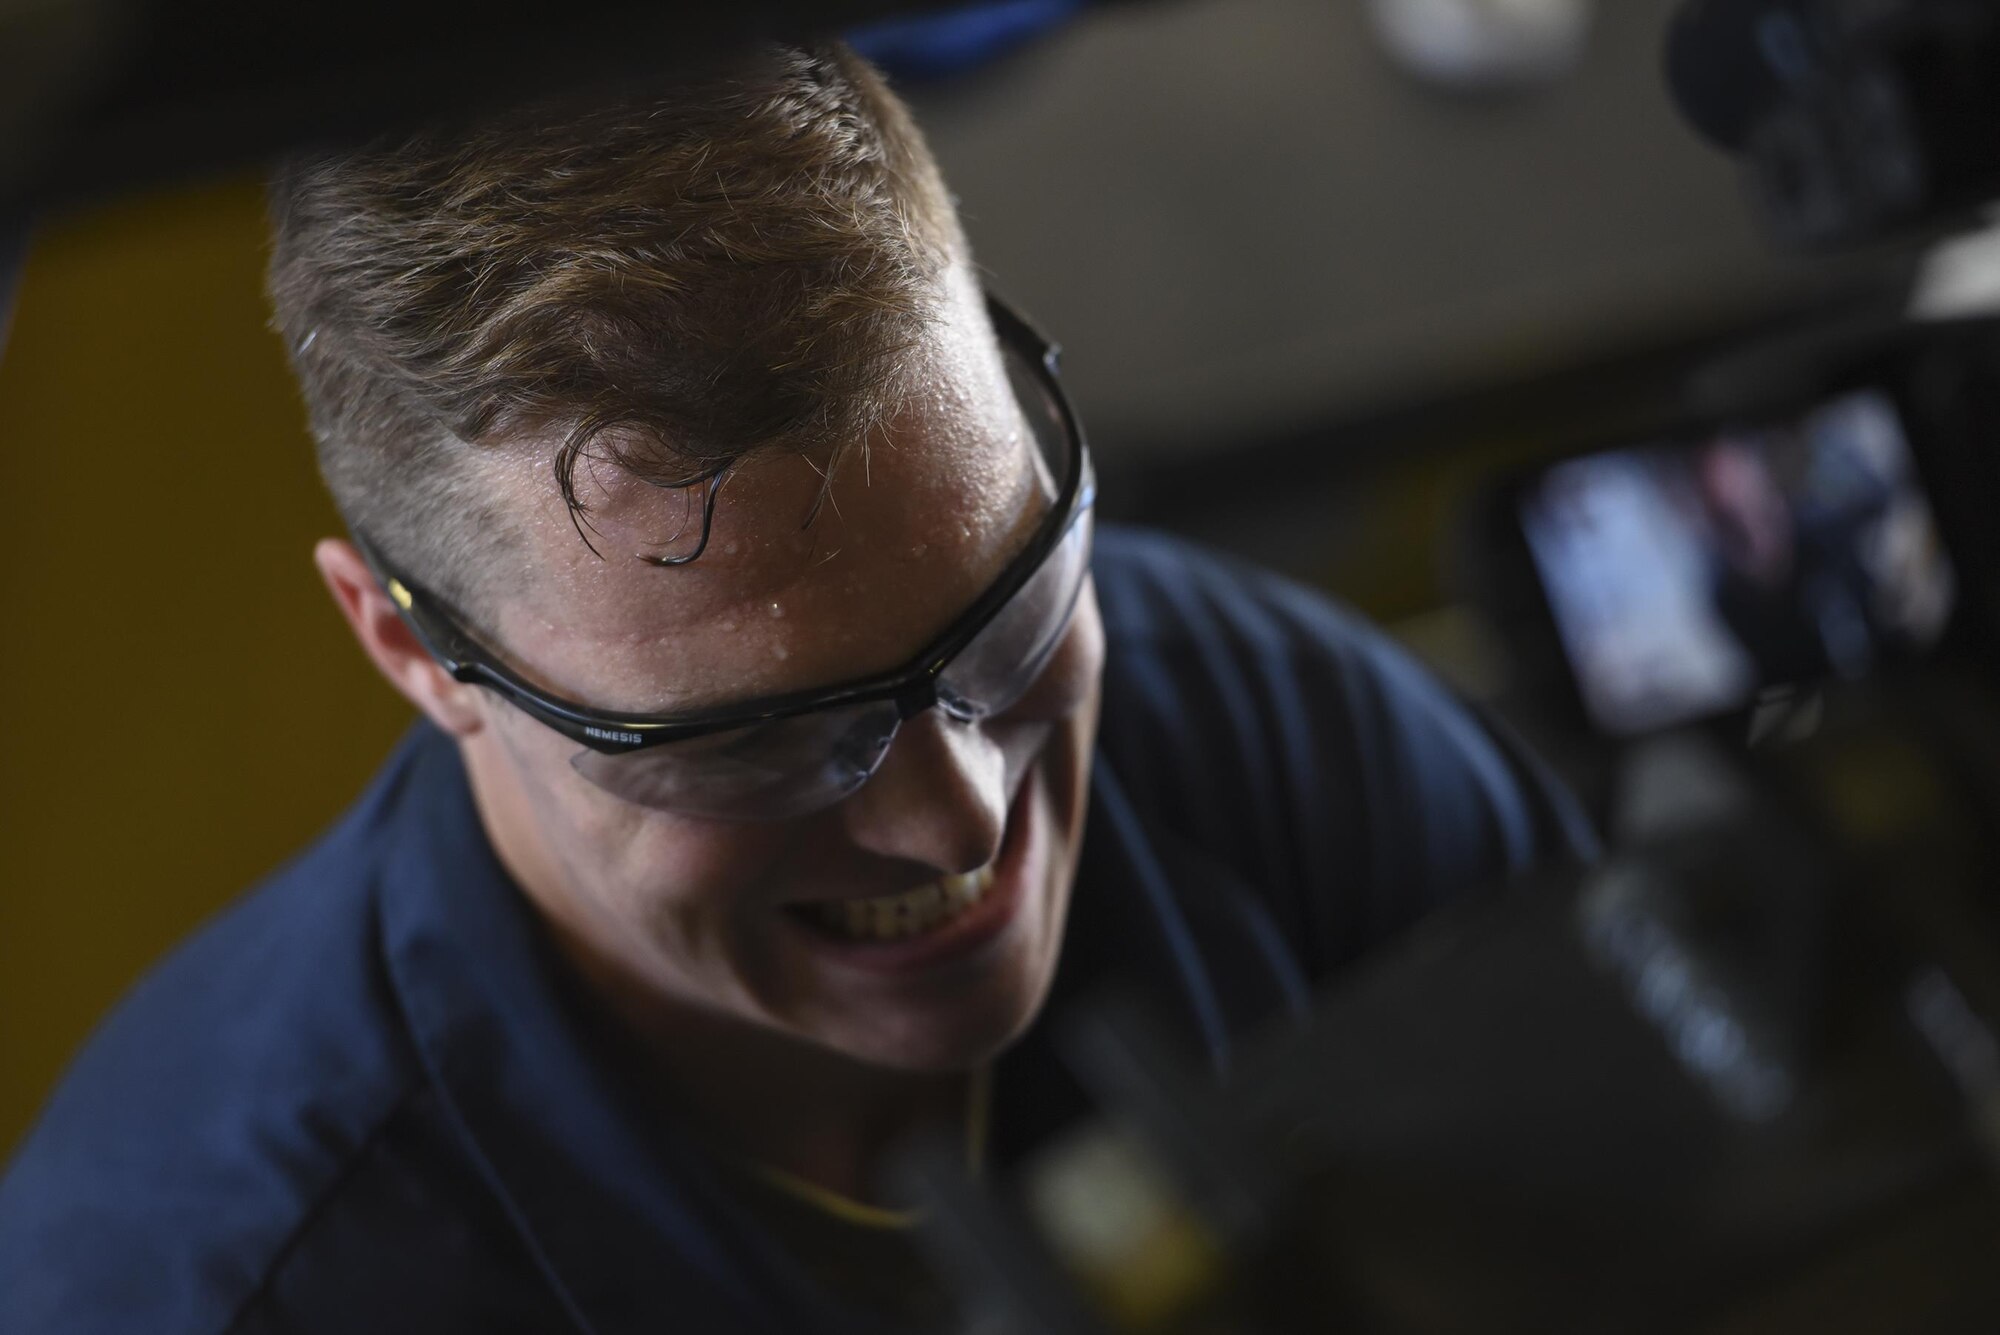 Senior Airman Kyle Saunders, 23d Wing Public Affairs broadcaster, tightens a bolt during the ‘A Closer Look’ series, July 13, 2017, at Moody Air Force Base, Ga. The series shows 23d WG PA broadcasters experiencing the grit and grime of several trades for Airmen to better understand and appreciate different missions. To watch the series, stay tuned for the premier on the Moody Facebook page and www.moody.af.mil, August 15. (U.S. Air Force photo by Senior Airman Greg Nash)